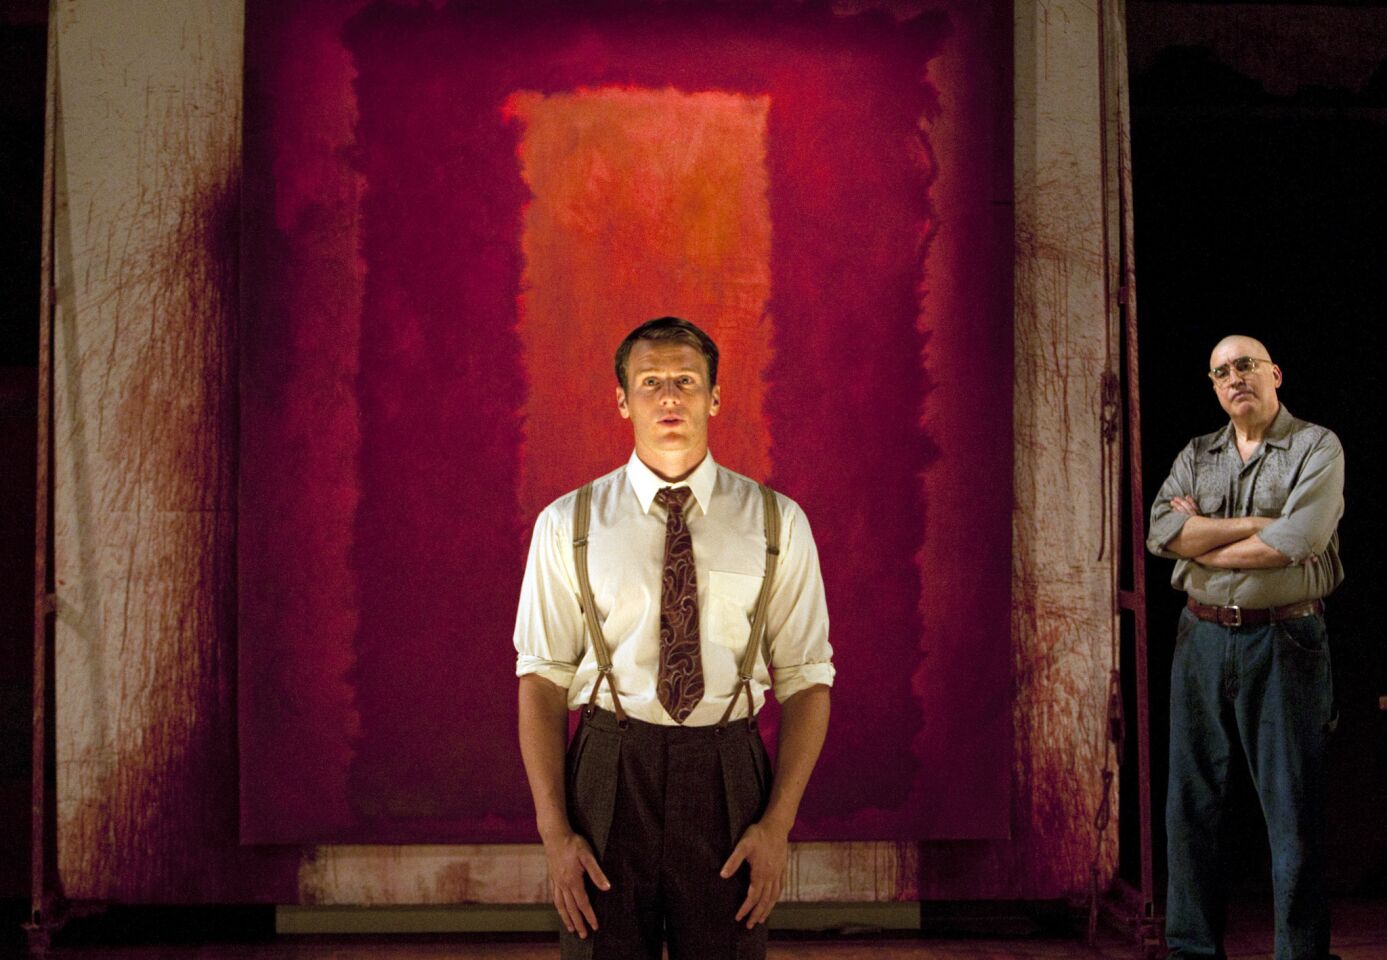 Jonathan Groff, left, and Alfred Molina star in the Tony Award-winning play "Red" by John Logan, which opened at the Mark Taper Forum on Aug. 12, 2012. REVIEW: A blazing "Red" with Alfred Molina as Mark Rothko